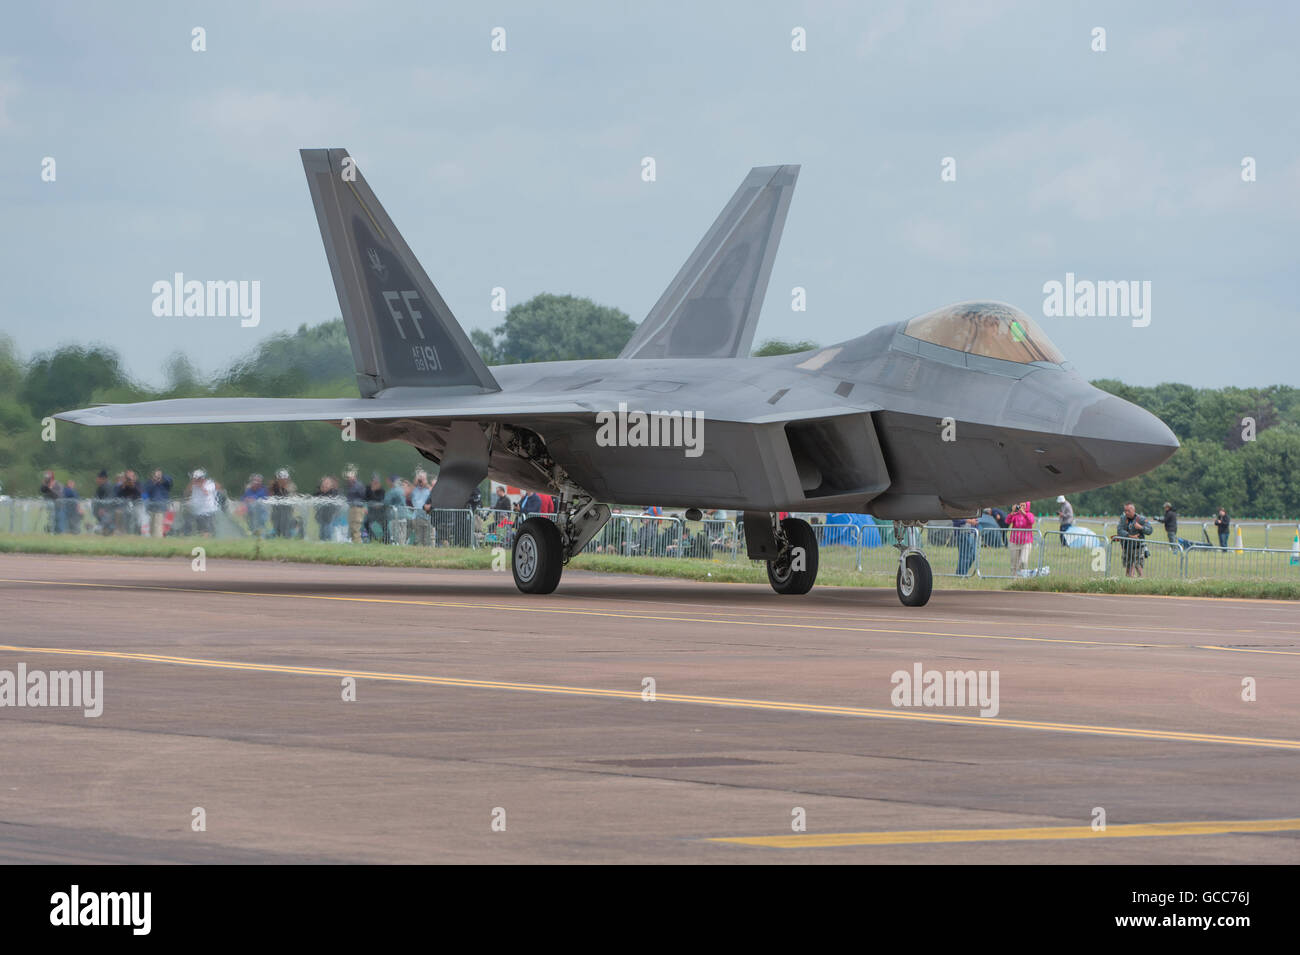 RAF Fairford, Gloucestershire. 8th July, 2016. Day 1 of the Royal International Air Tattoo (RIAT) with an impressive demo from the Lockheed Martin F-22A Raptor fifth generation stealth fighter. Credit:  aviationimages/Alamy Live News. Stock Photo